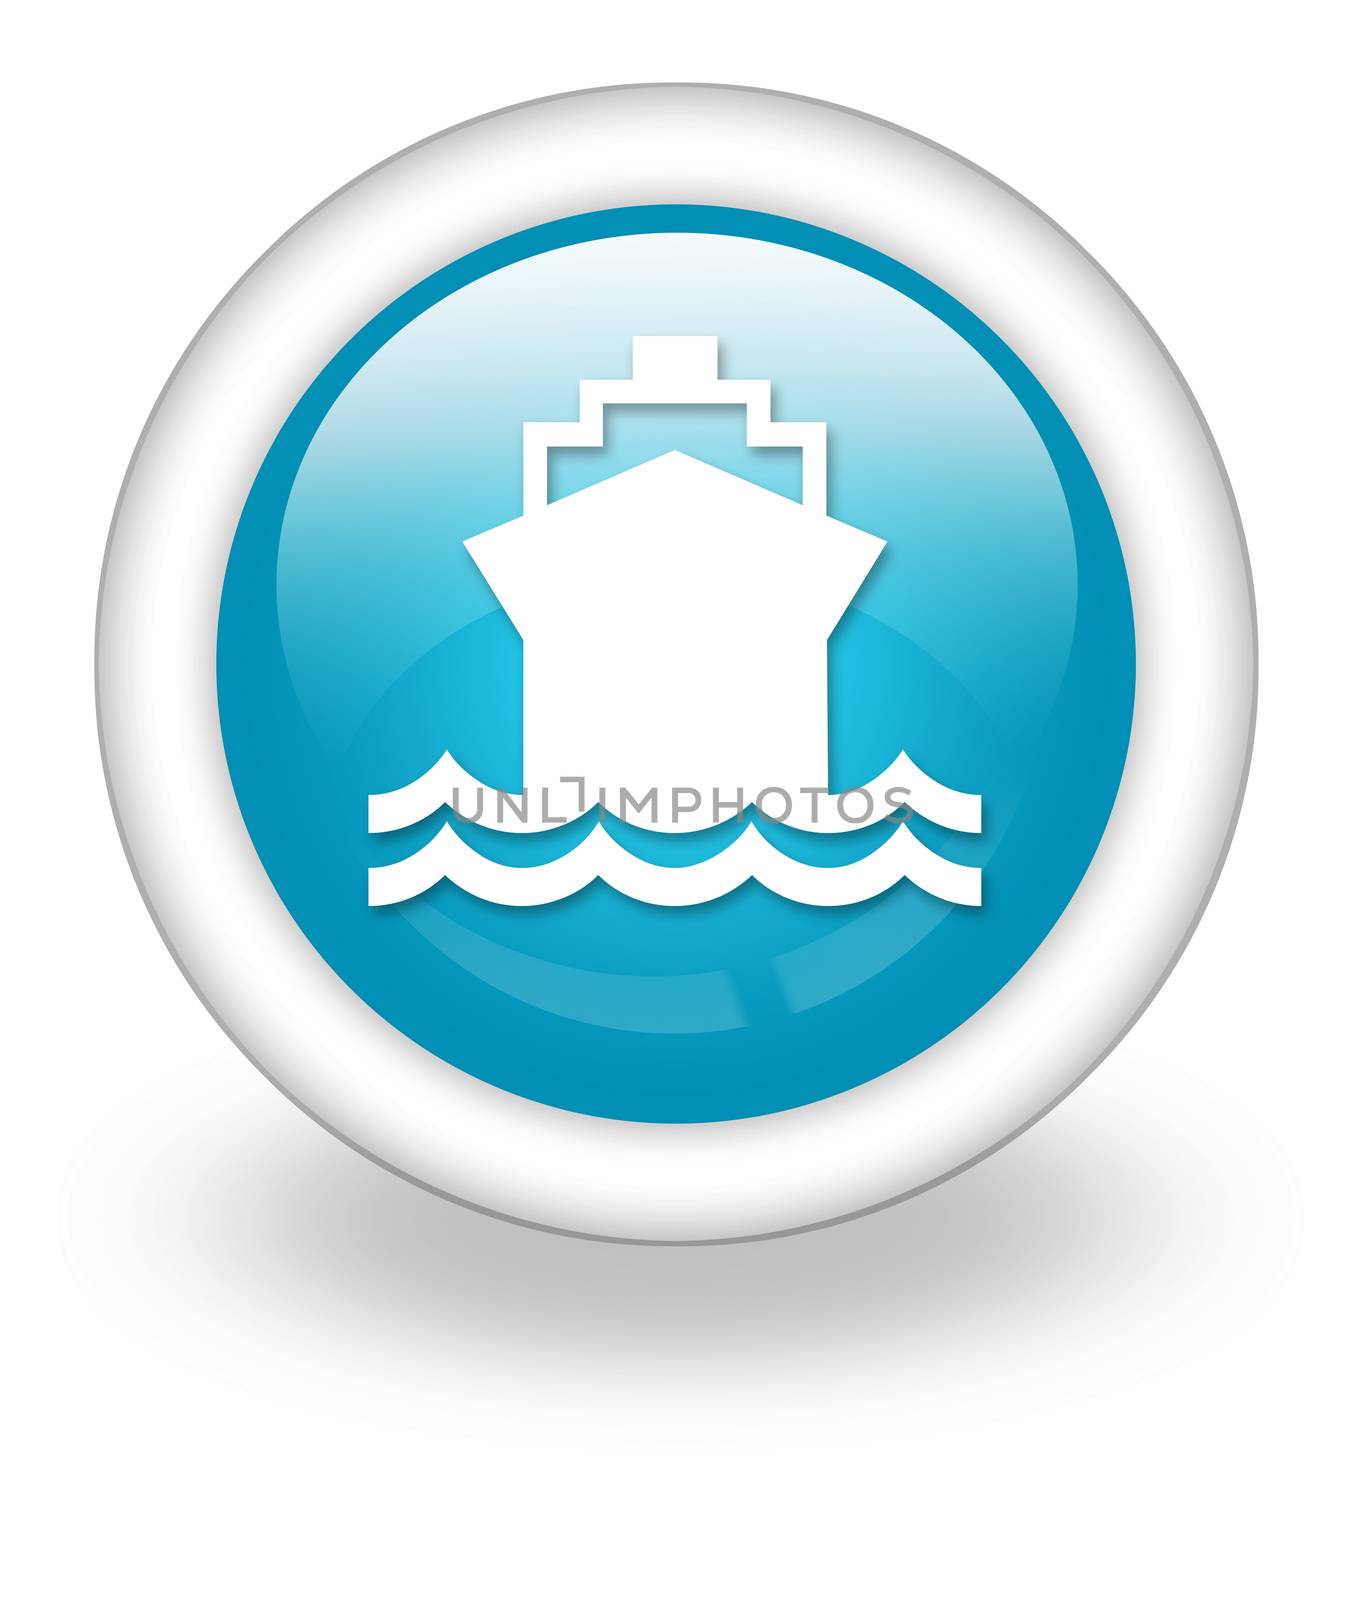 Icon, Button, Pictogram Ship, Water Transportation by mindscanner